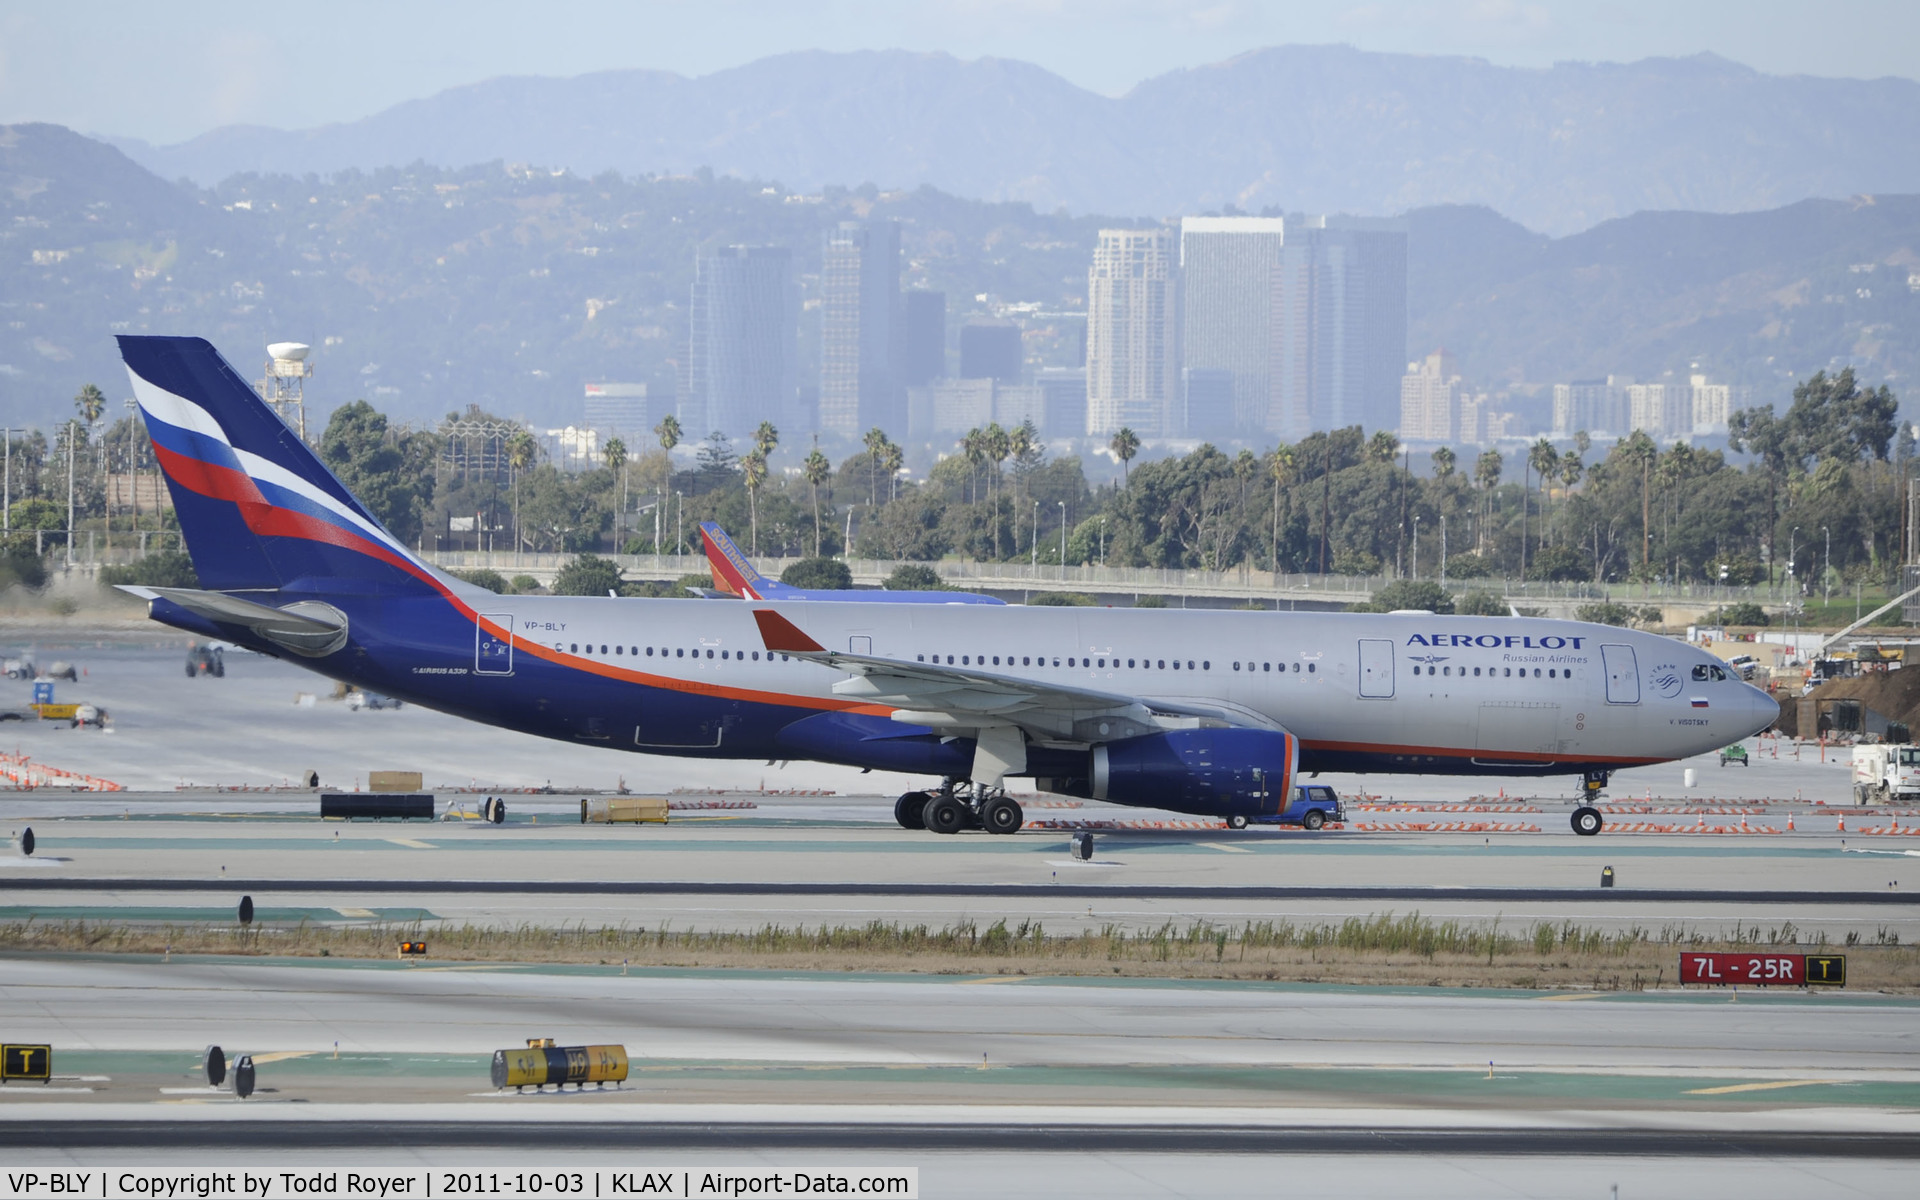 VP-BLY, 2008 Airbus A330-243 C/N 973, Taxiing at LAX